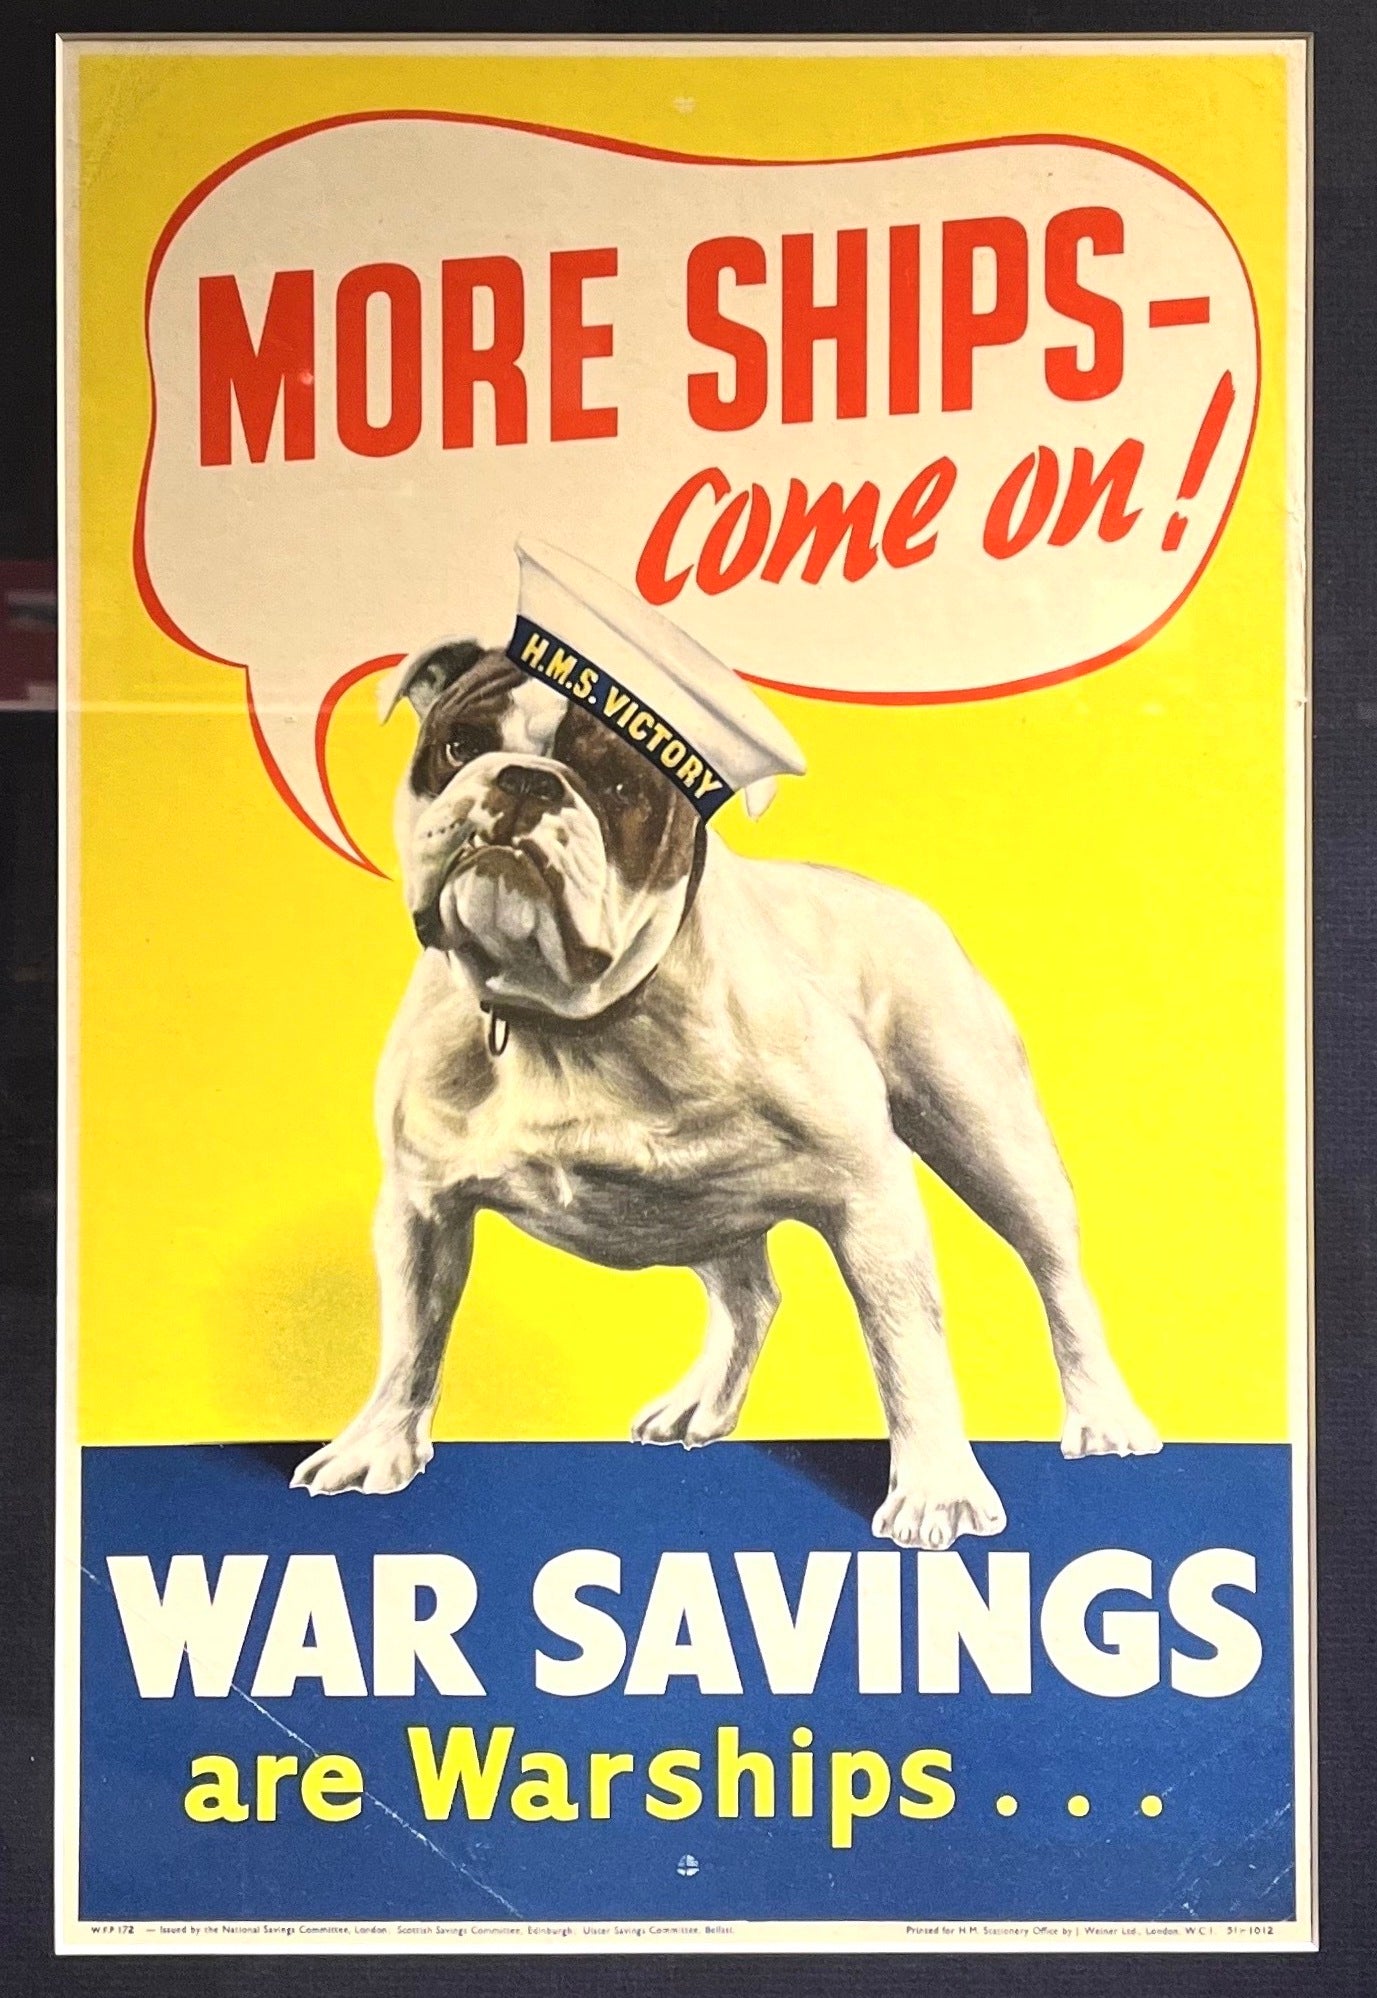 "More Ships - Come on! War Savings are Warships..." Vintage WWII British Poster - The Great Republic